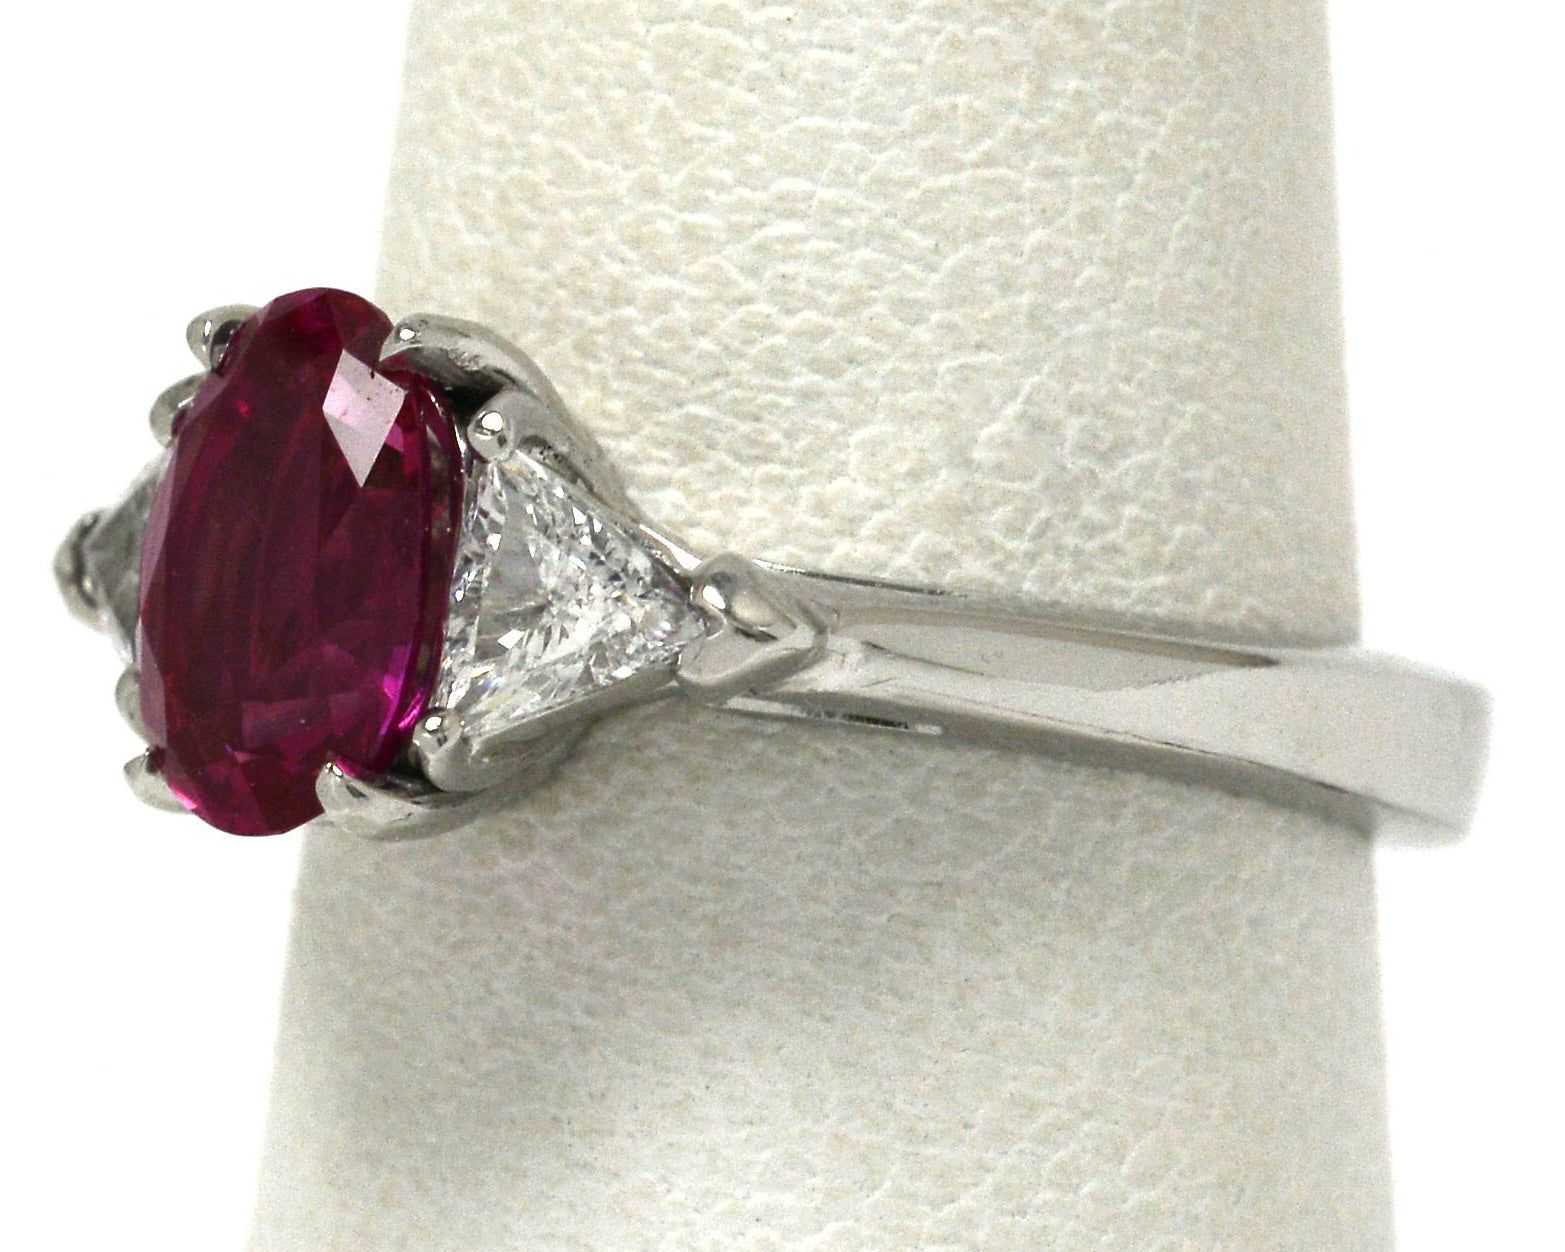 A 3 stone natural pink sapphire and 2 triangle diamonds engagement ring.